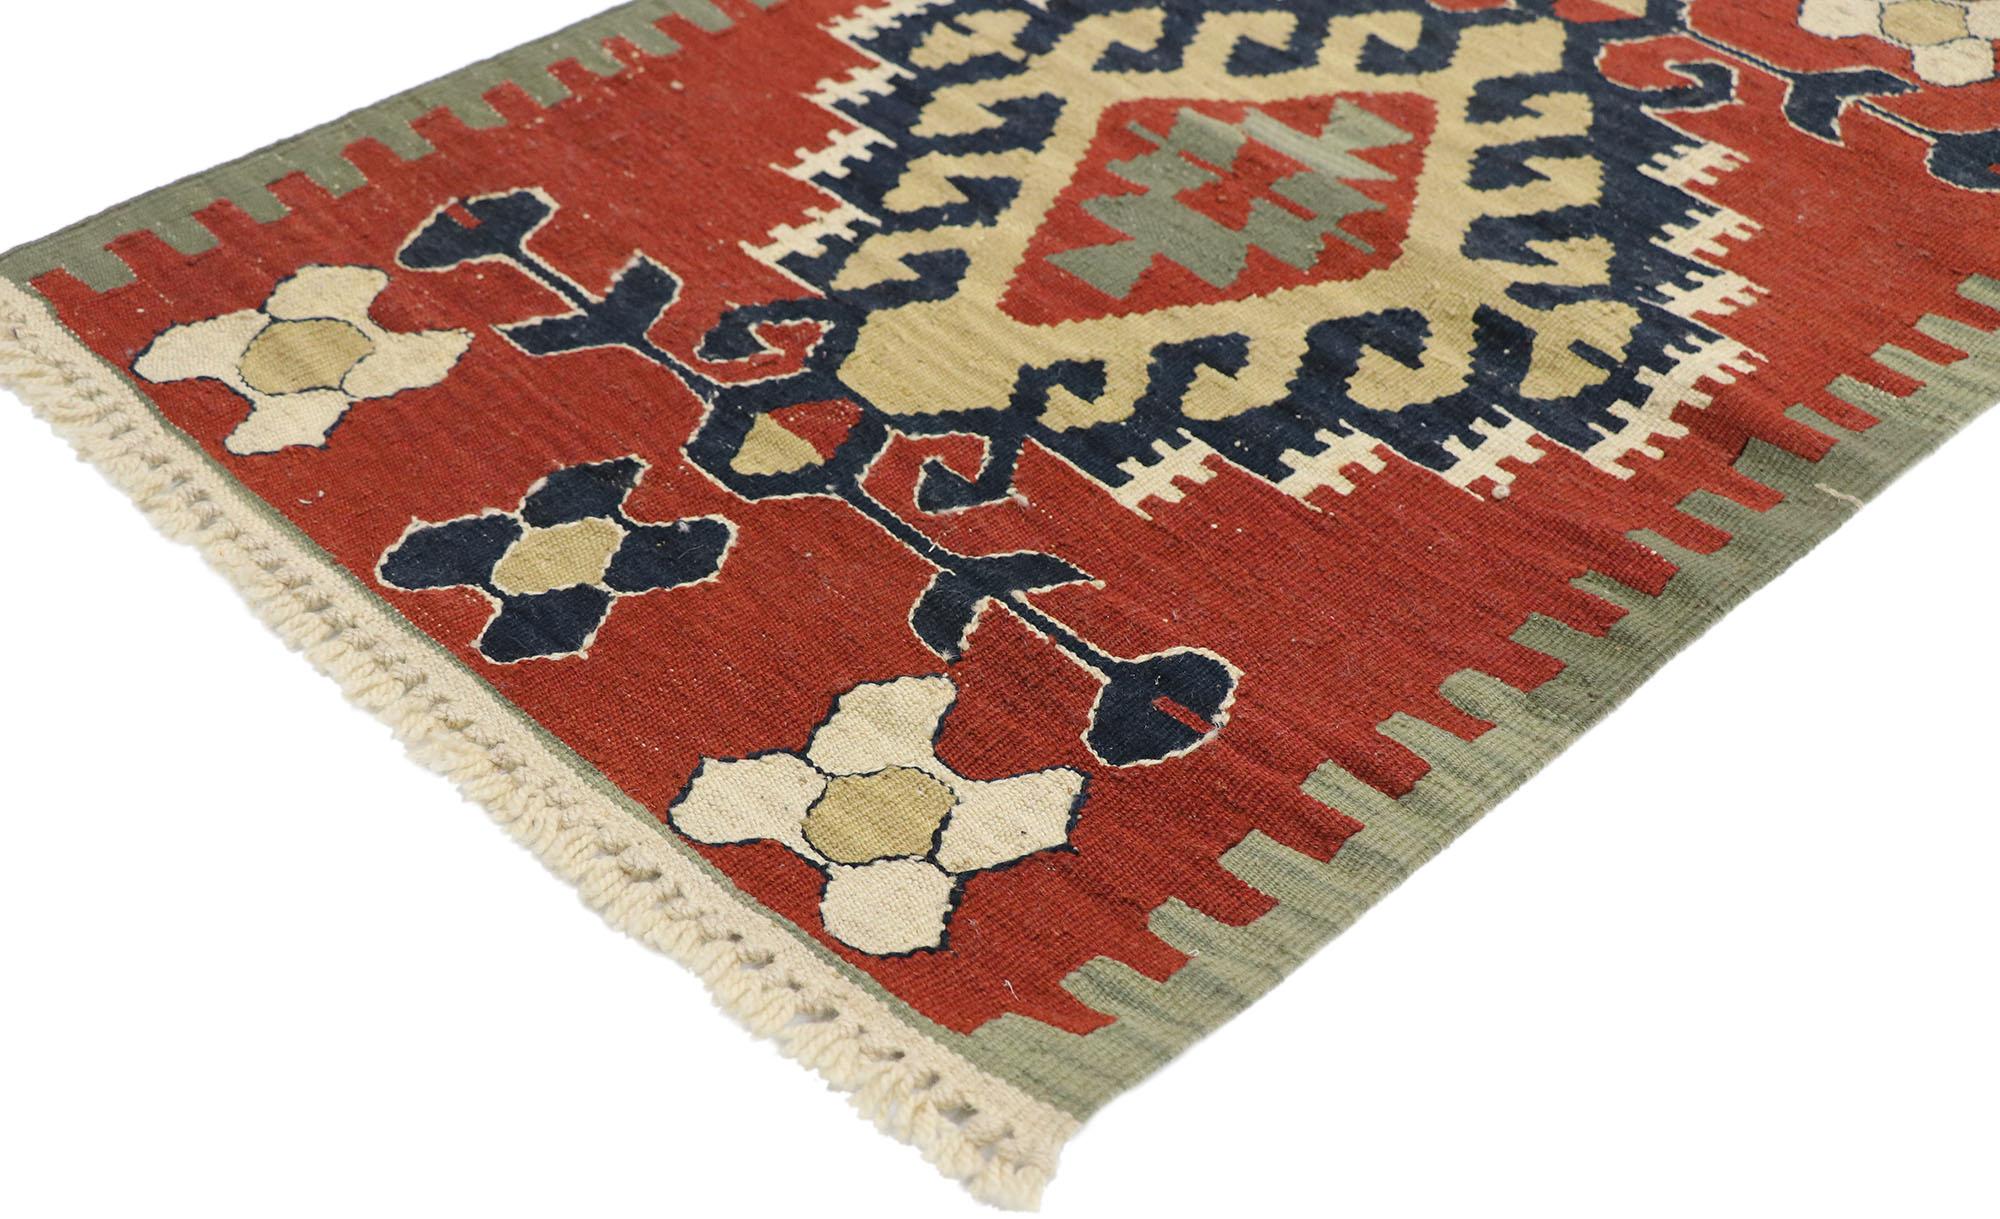 77894 vintage Persian Shiraz Kilim rug with Tribal style 02'00 x 02'10. Full of tiny details and a bold expressive design combined with vibrant colors and tribal style, this hand-woven wool vintage Persian Shiraz kilim rug is a captivating vision of